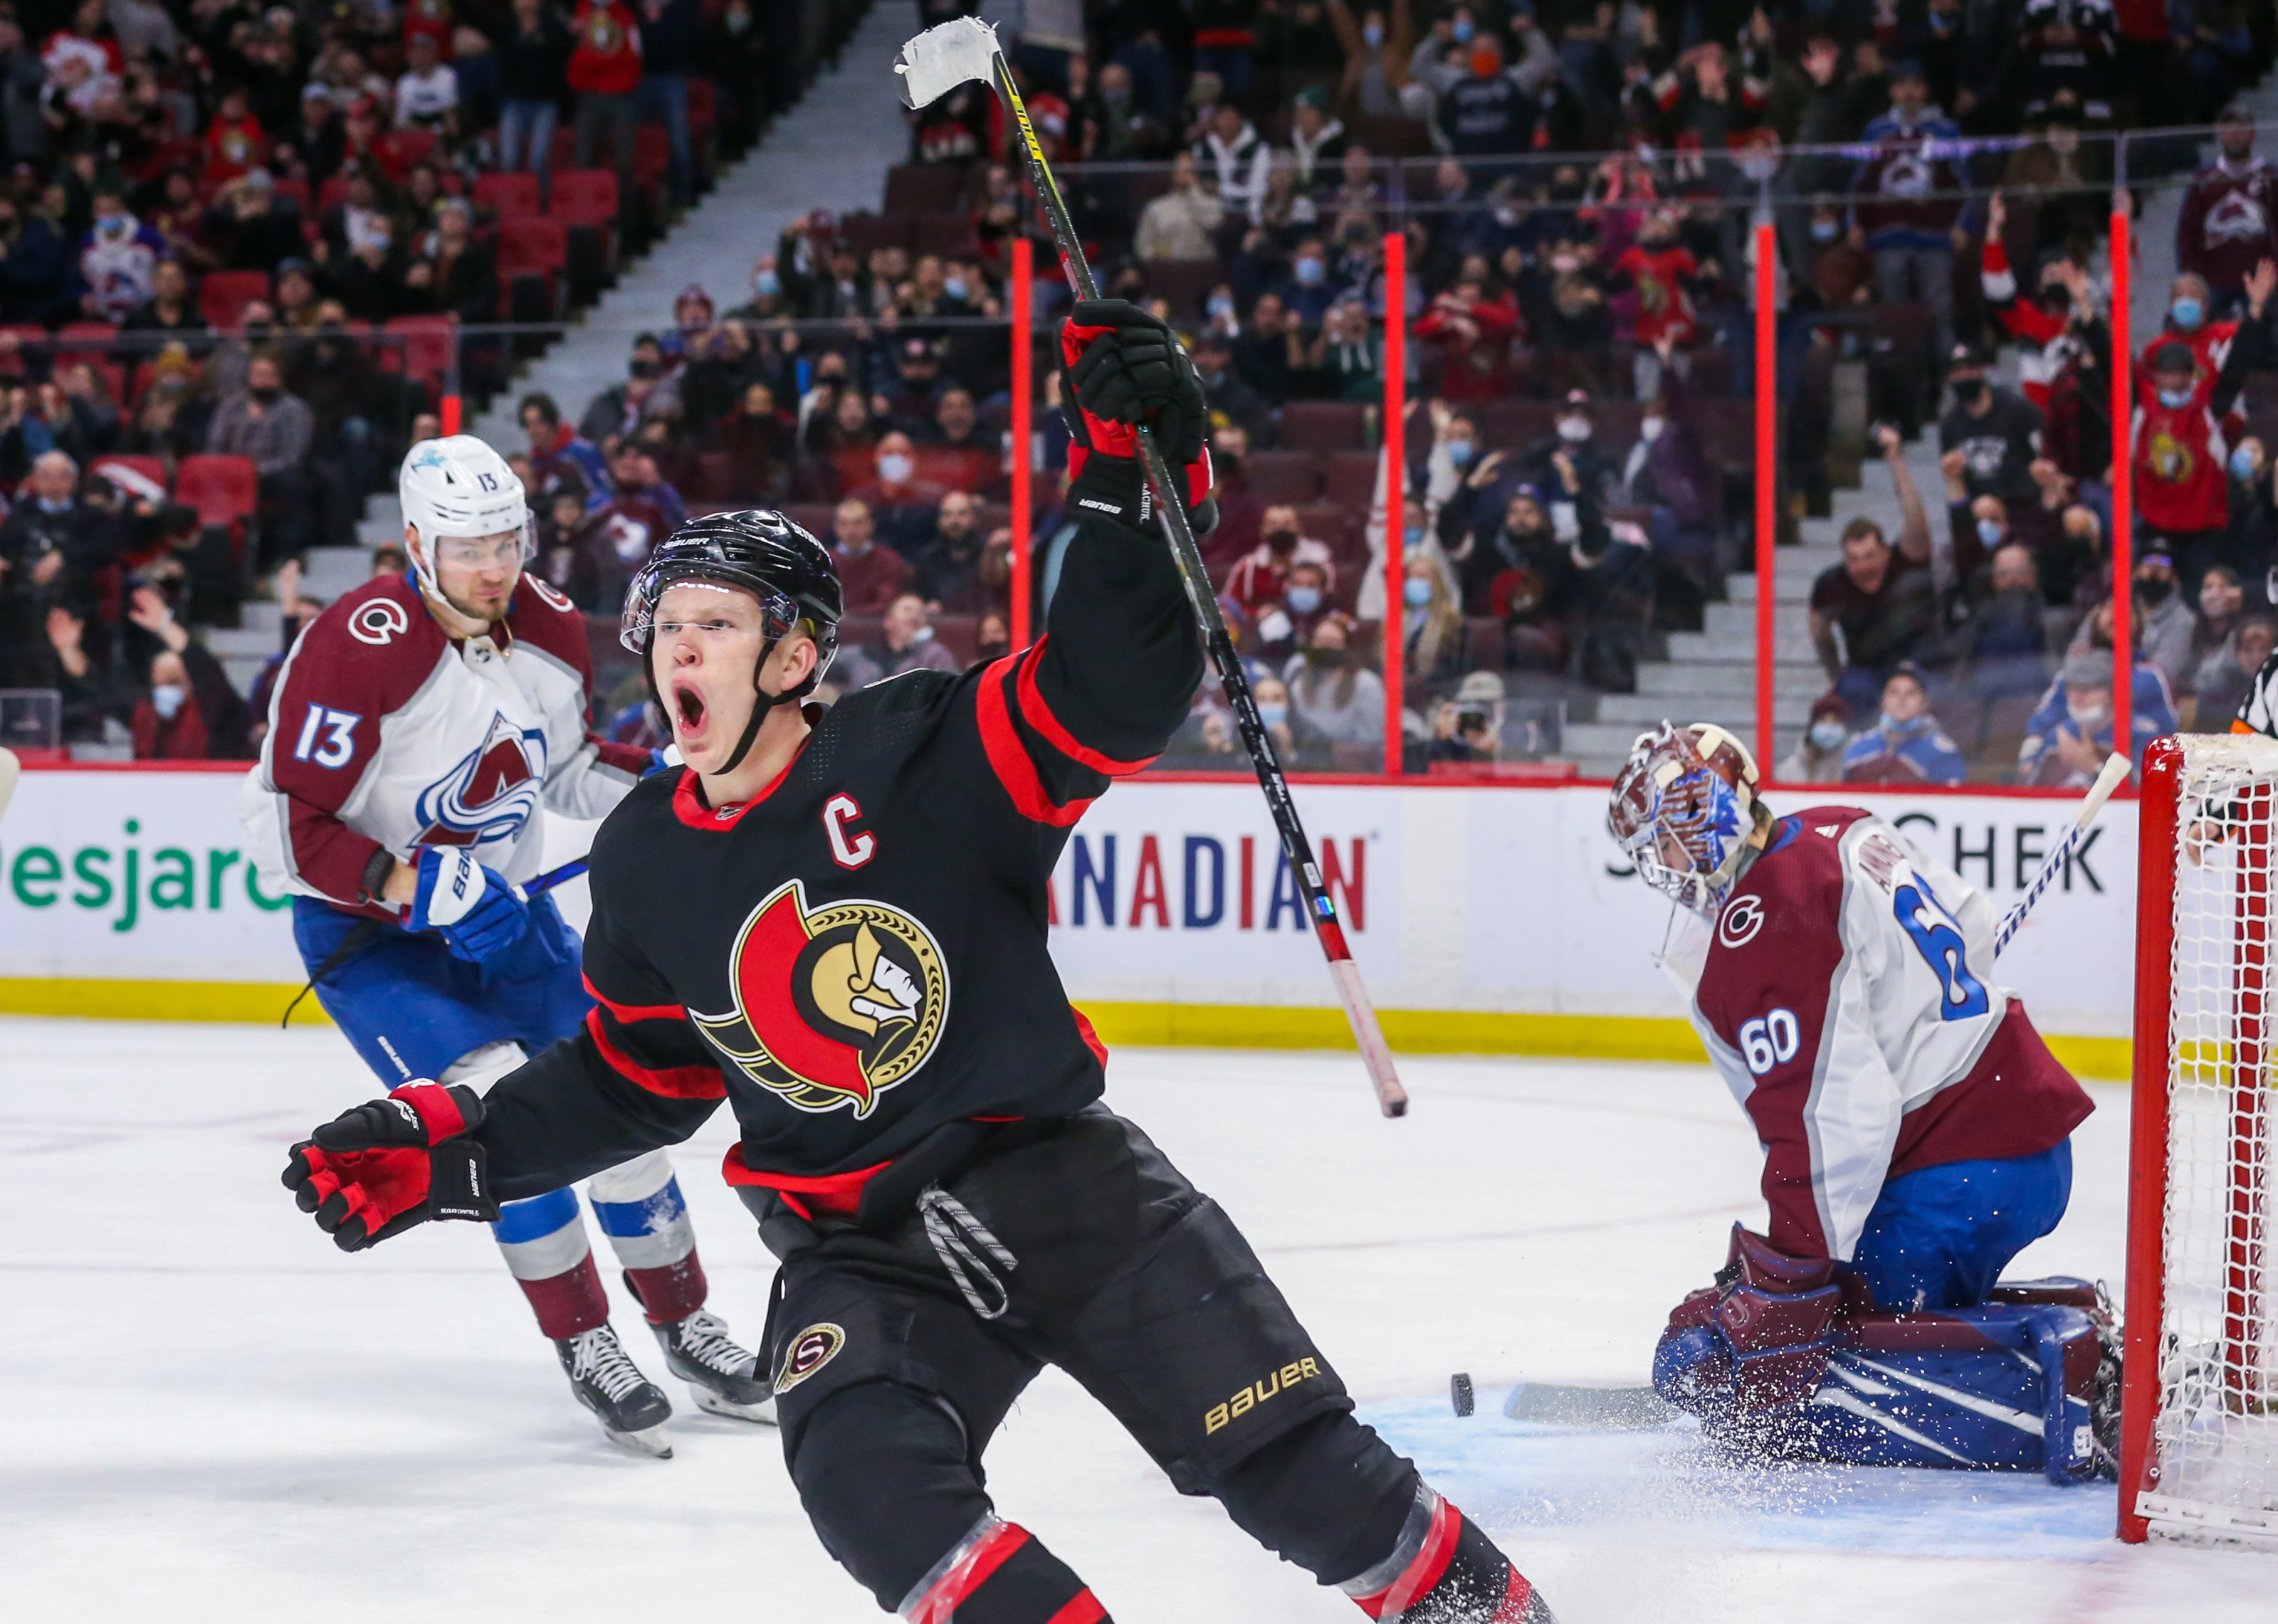 Game Preview #18: New Jersey Devils at Ottawa Senators - All About